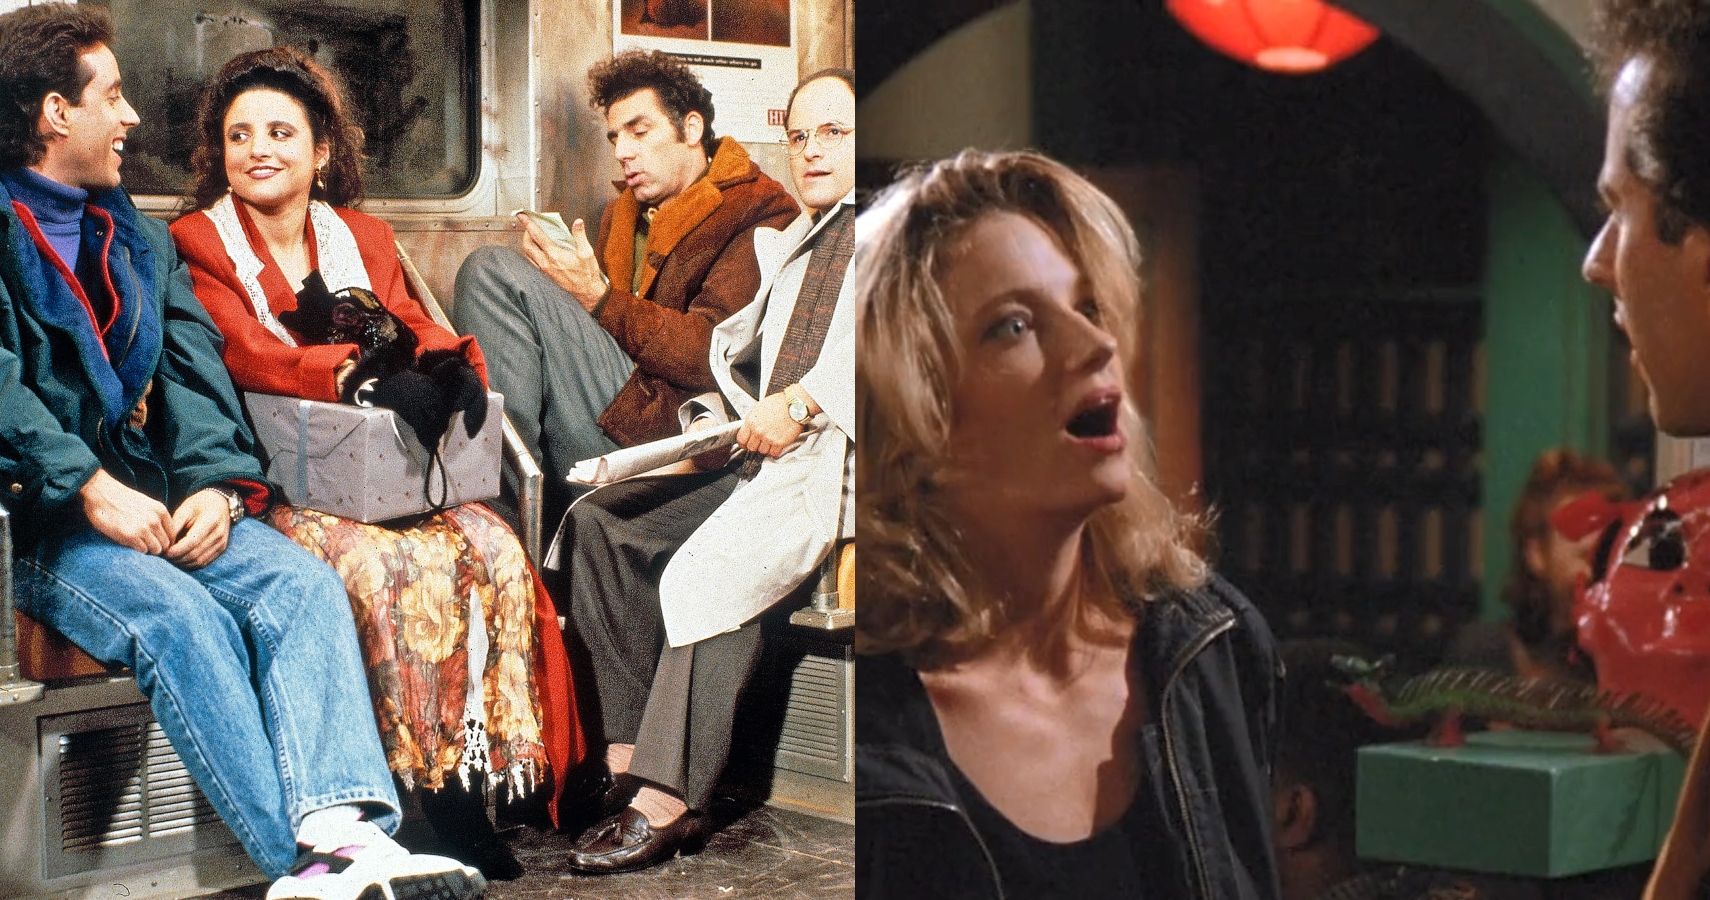 Seinfeld 10 Jokes That Have Aged Poorly